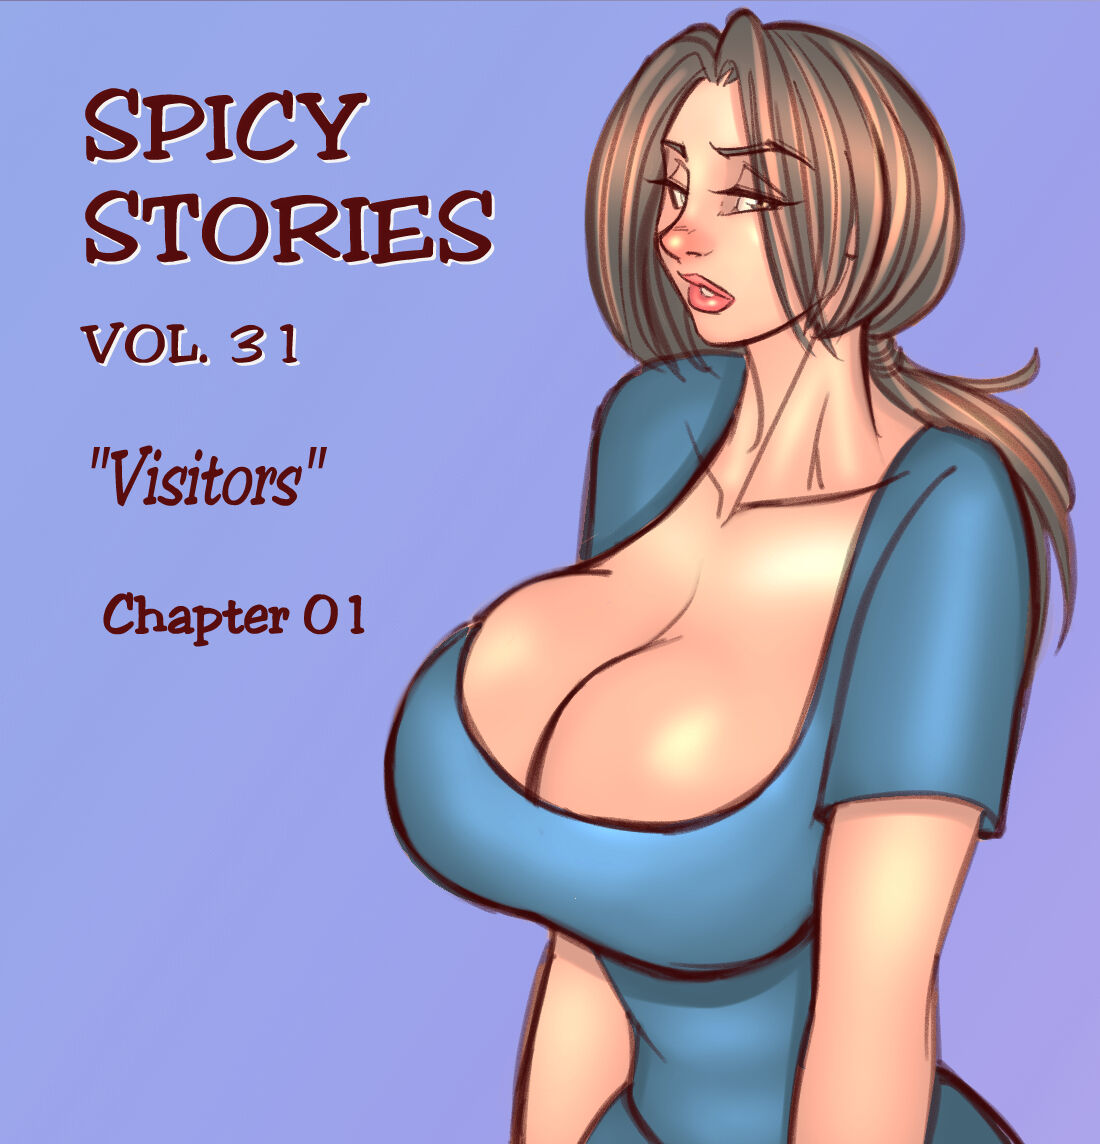 NGT Spicy Stories 31 - Visitors by NGTvisualstudio